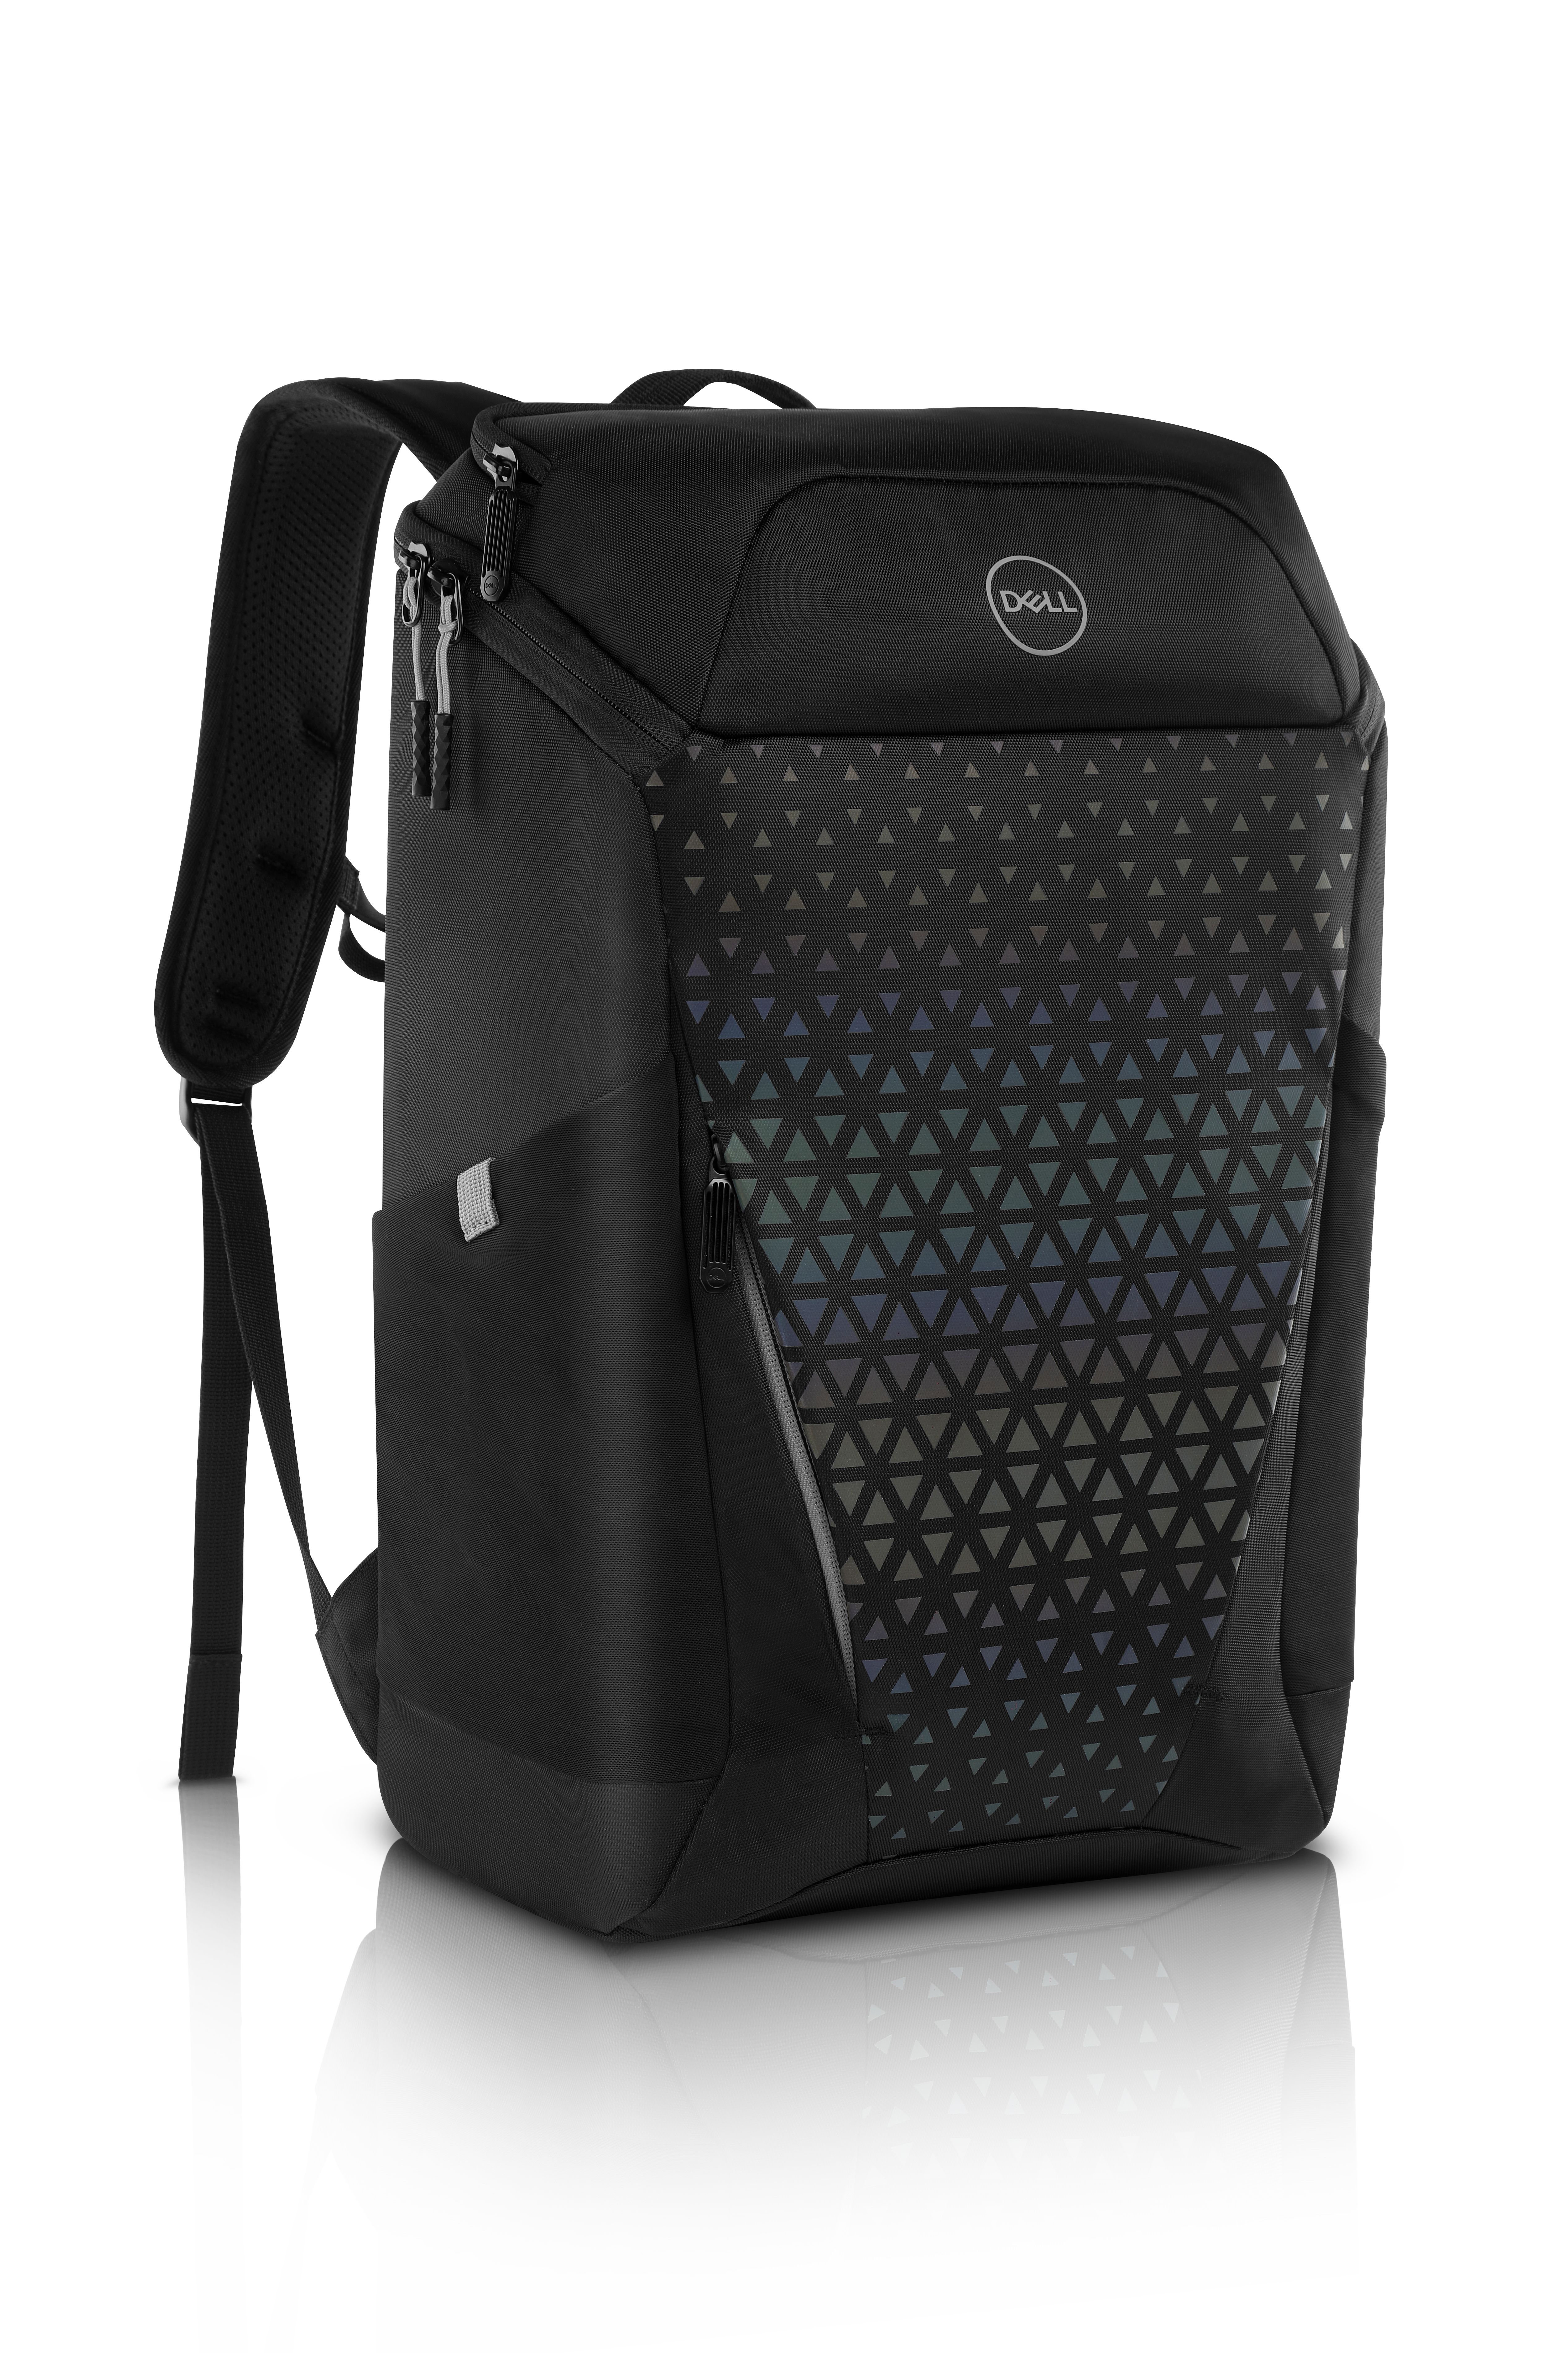 Backpack GAMING  DELL 460-BCYY